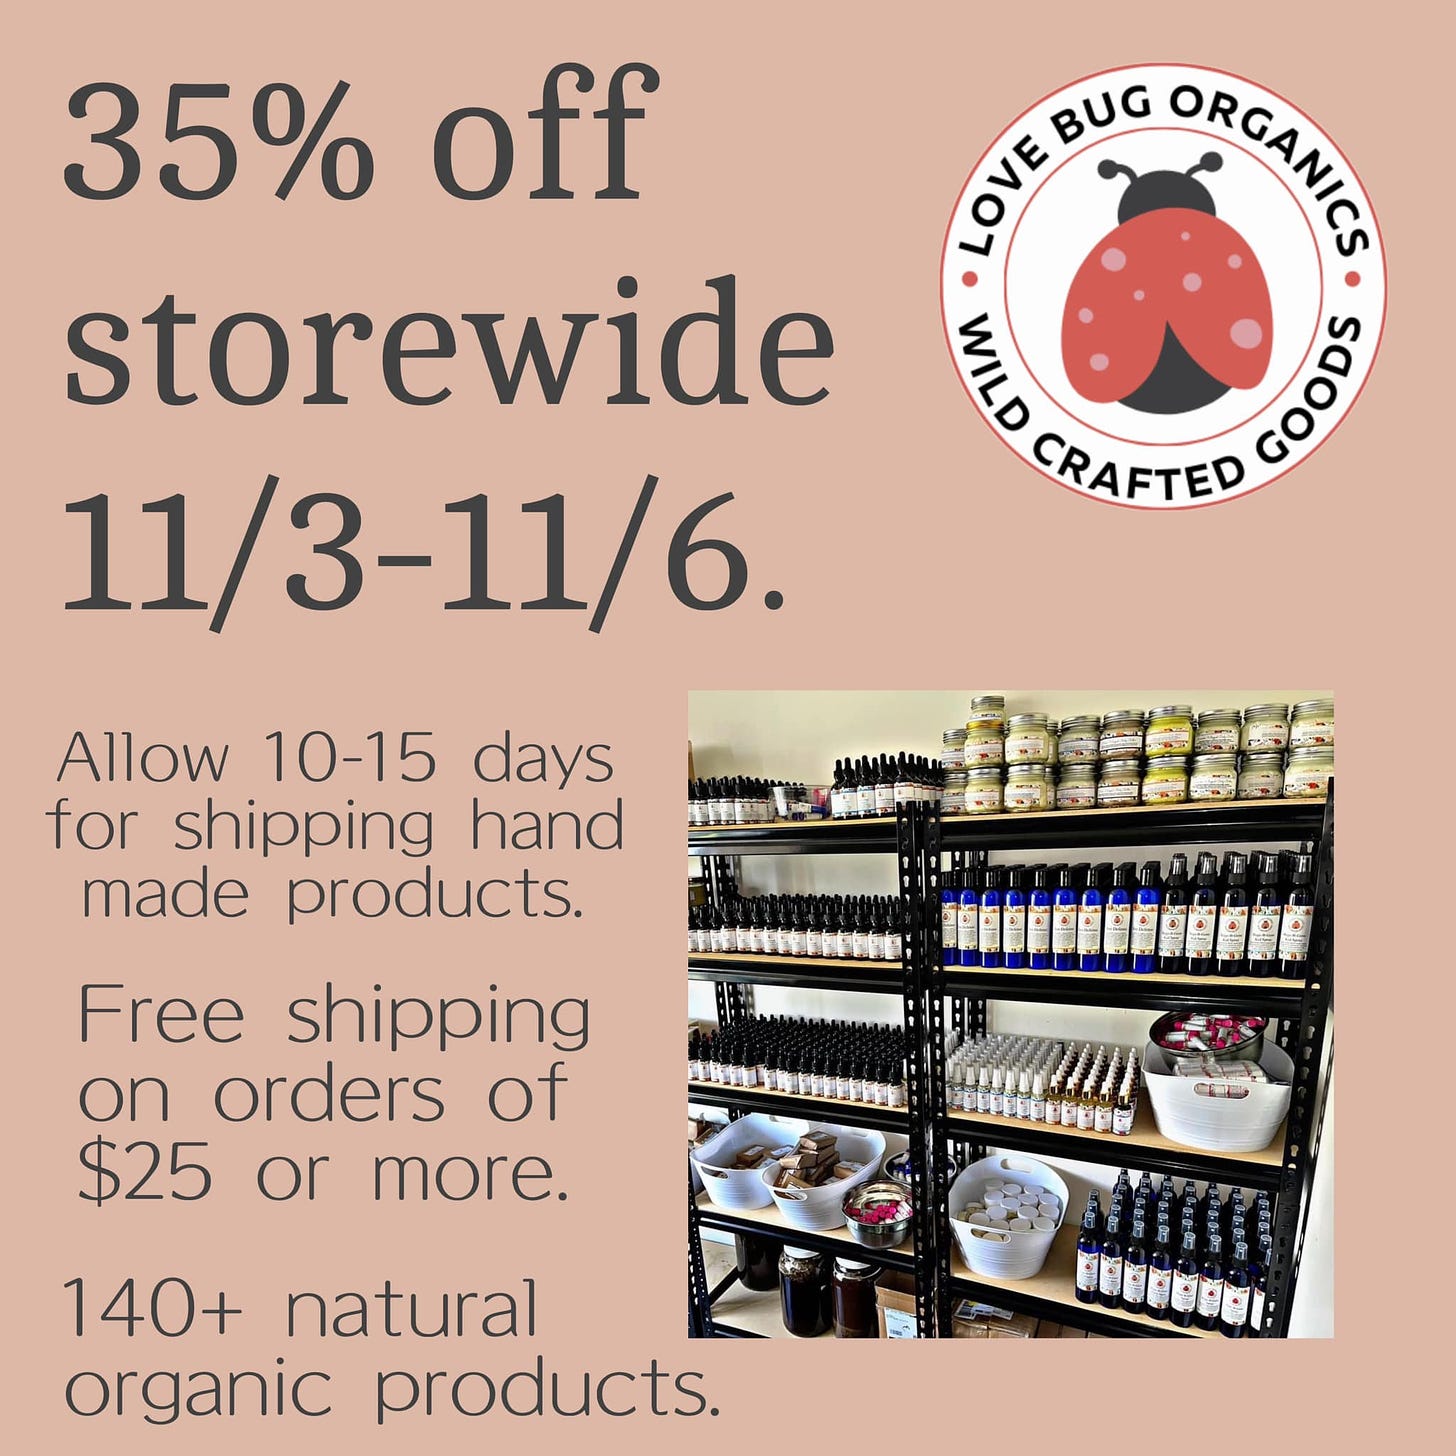 May be an image of text that says '35% off storewide 11/3-11/6. BUG ORGANIES LOVE VLD CRAFTED 0 GOOD Allow 10-15 days for shipping hand made products. Free shipping on orders of $25 or more. 140+ natural organic products. 10.ర0:'